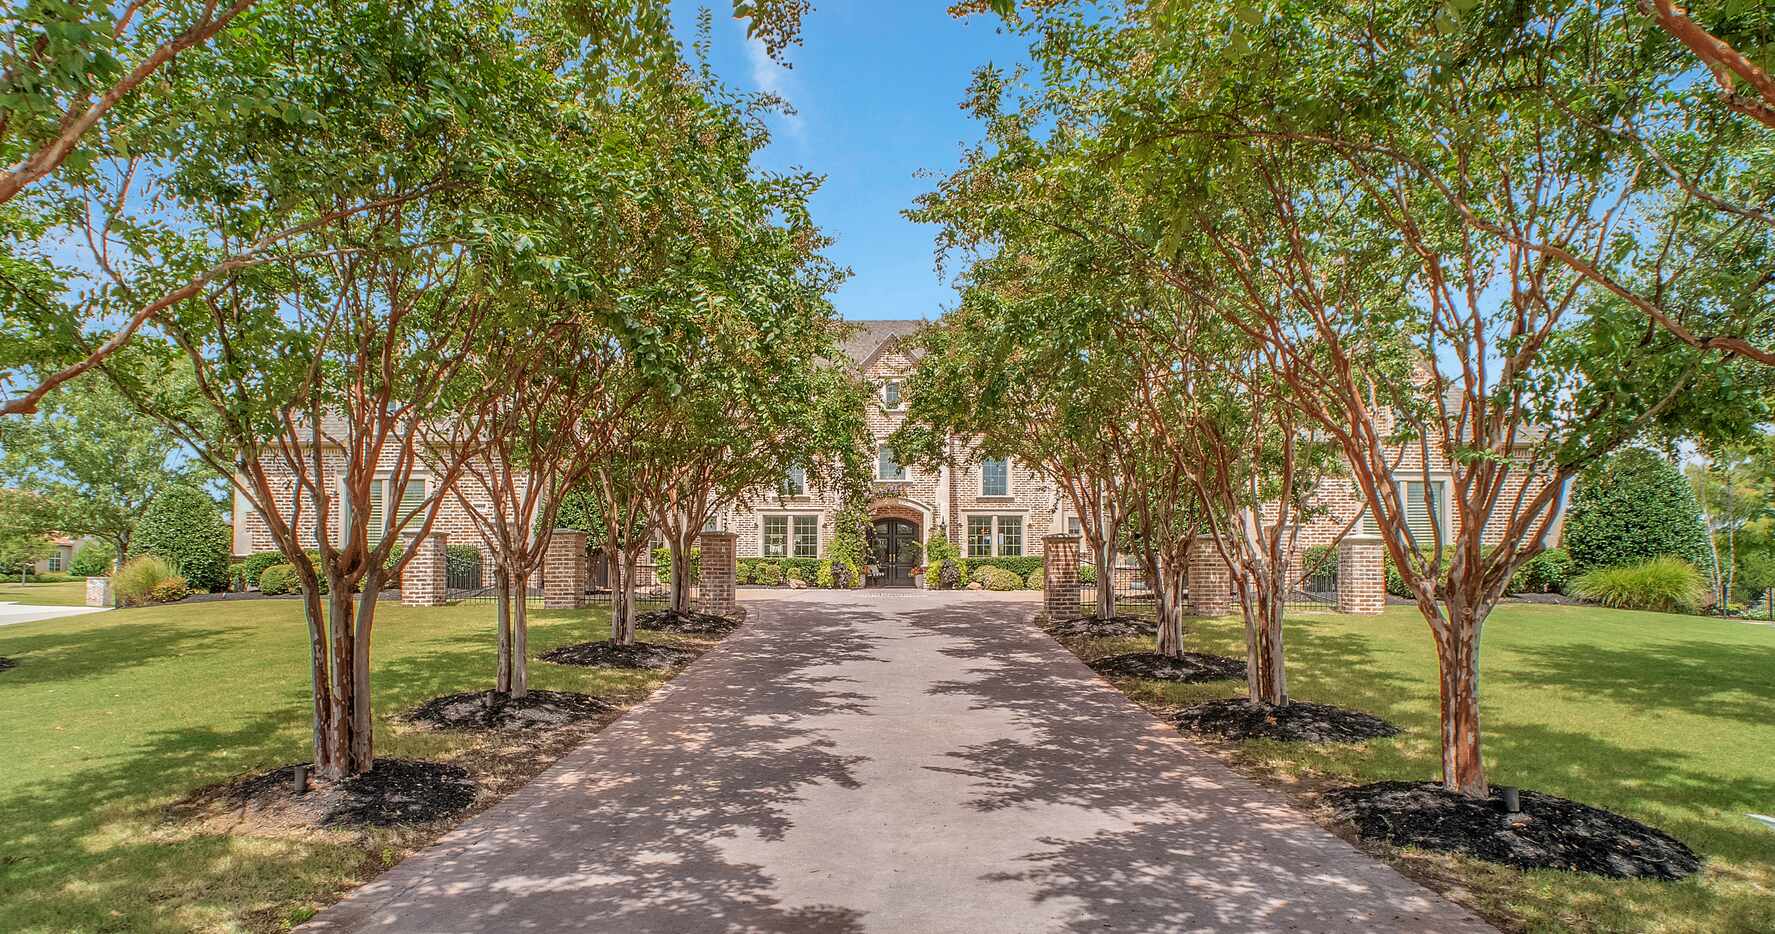 Situated on more than an acre in the Prosper neighborhood of Whispering Farms, this 2005...